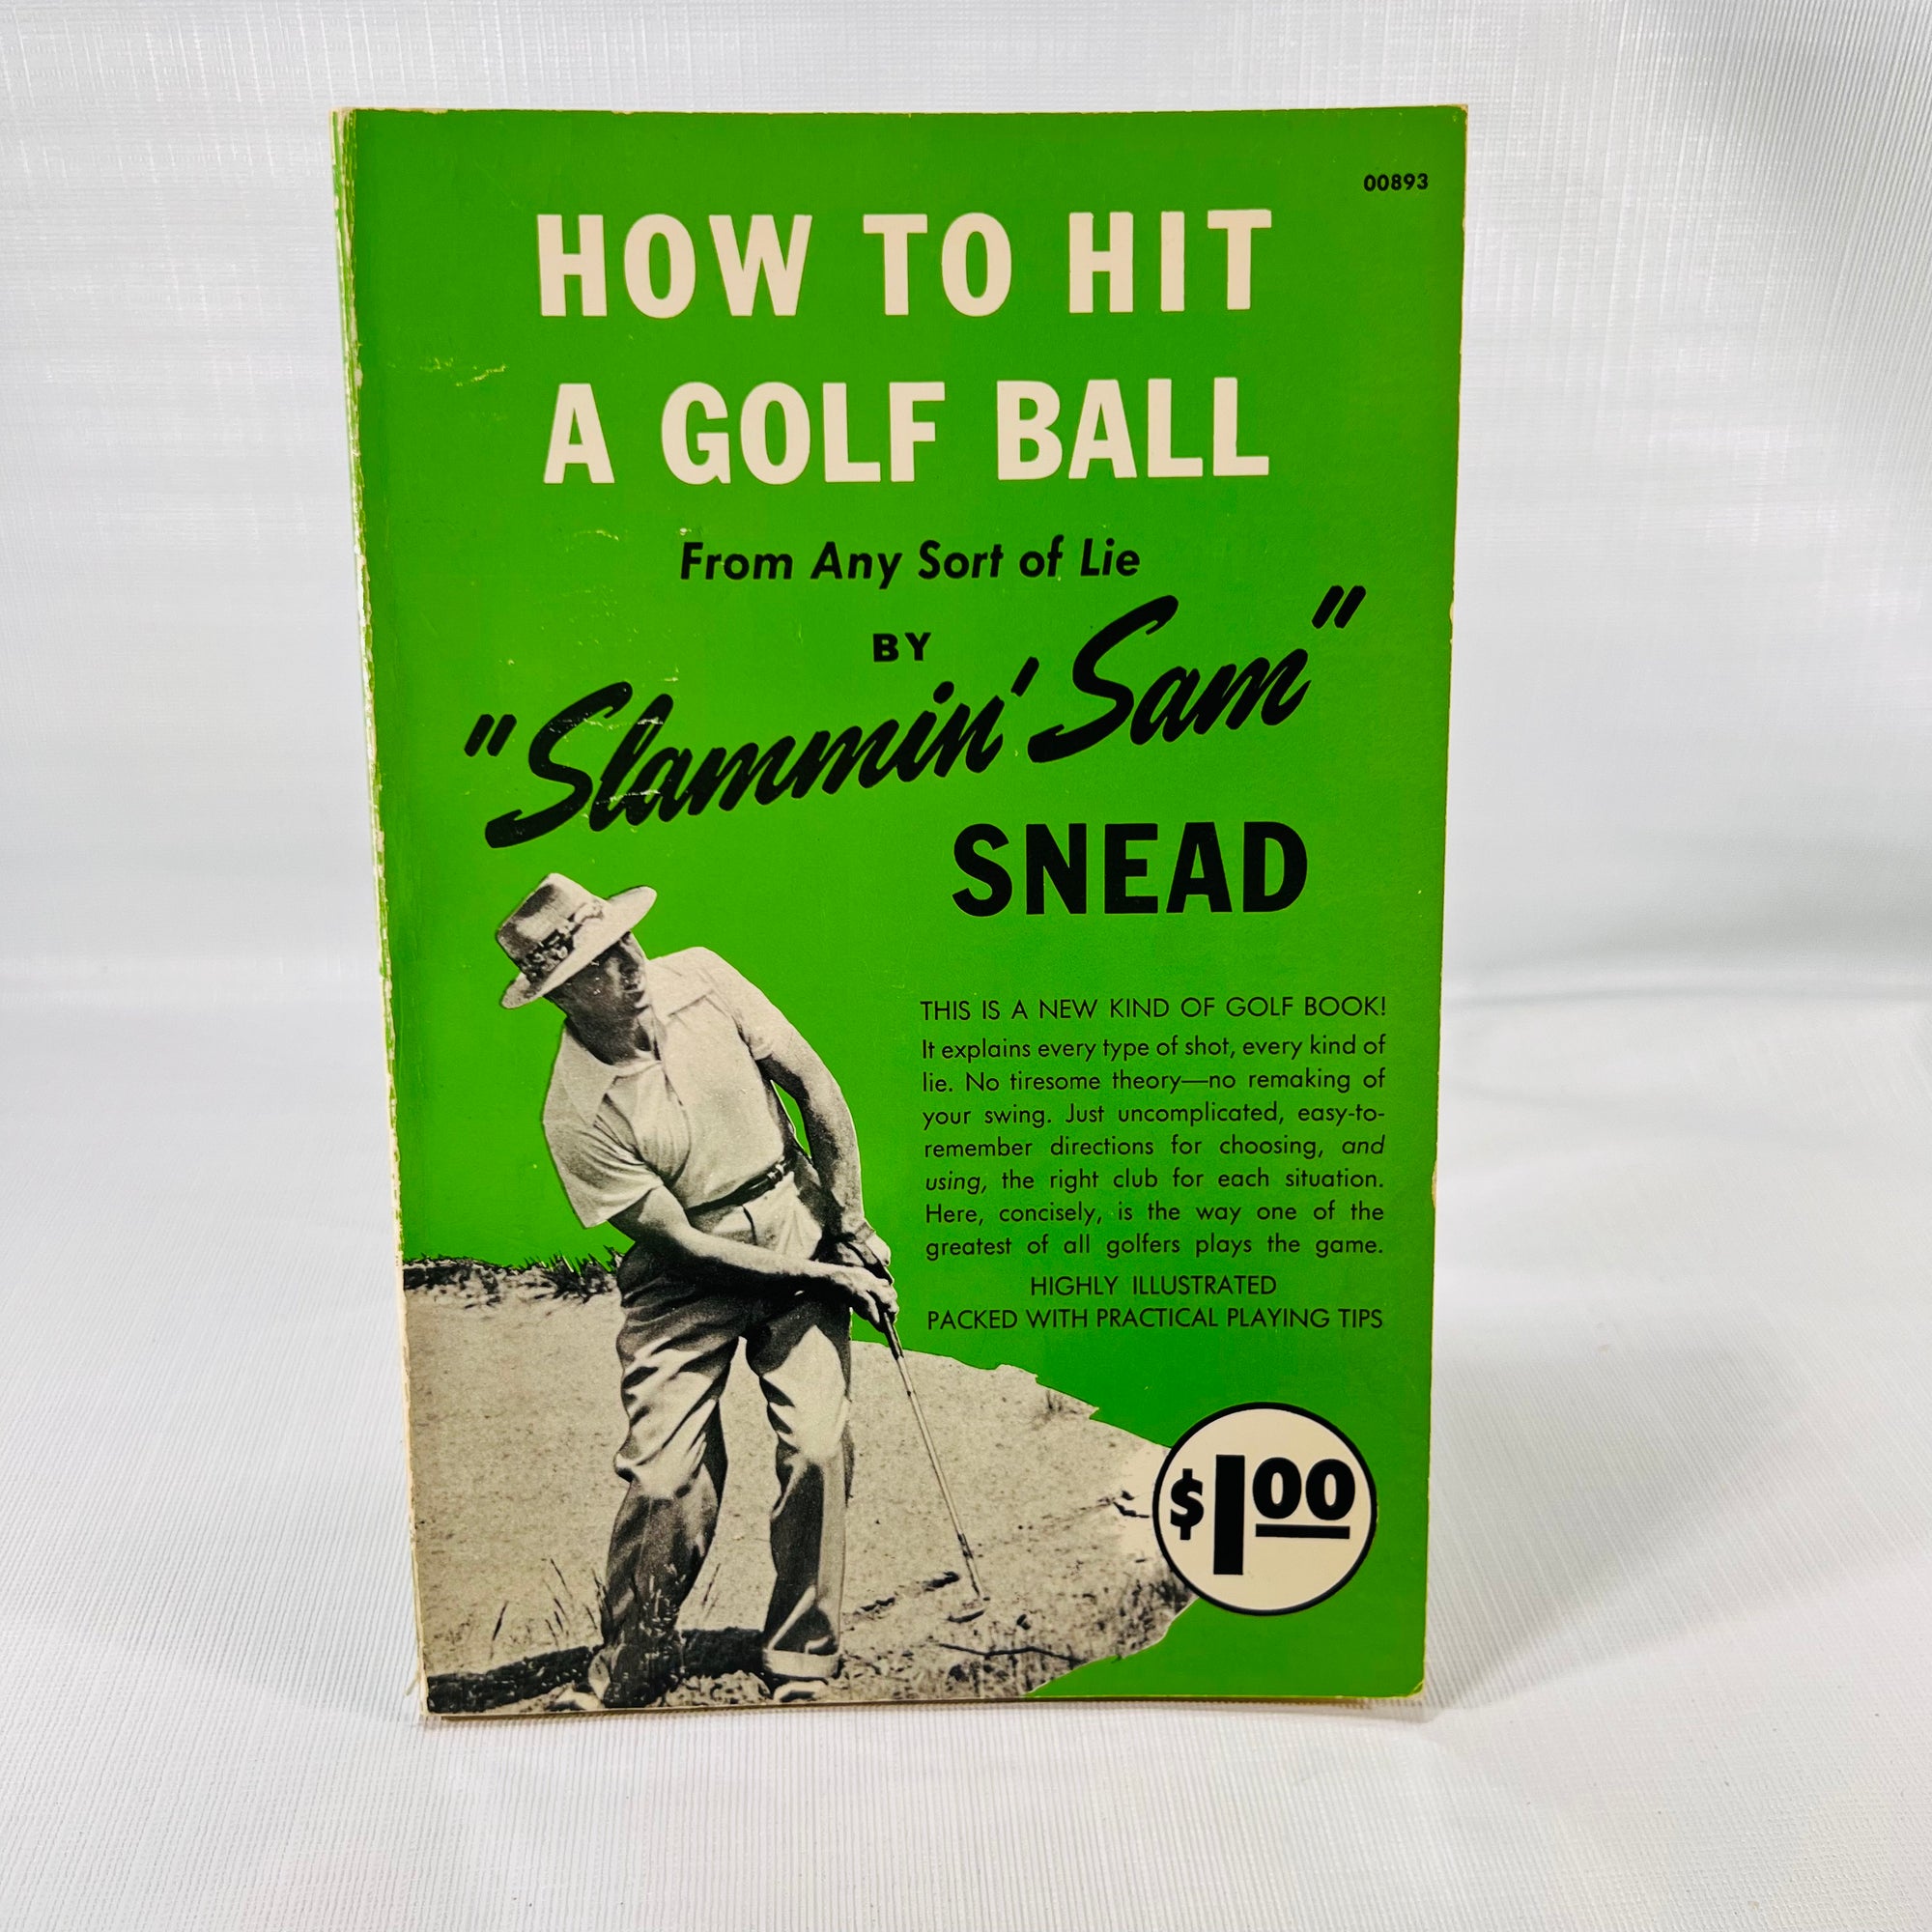 Slammin' Sam an Autobiography 1986Donald I Find Inc and How to Hit a Golf Ball 1950 Garden City Books